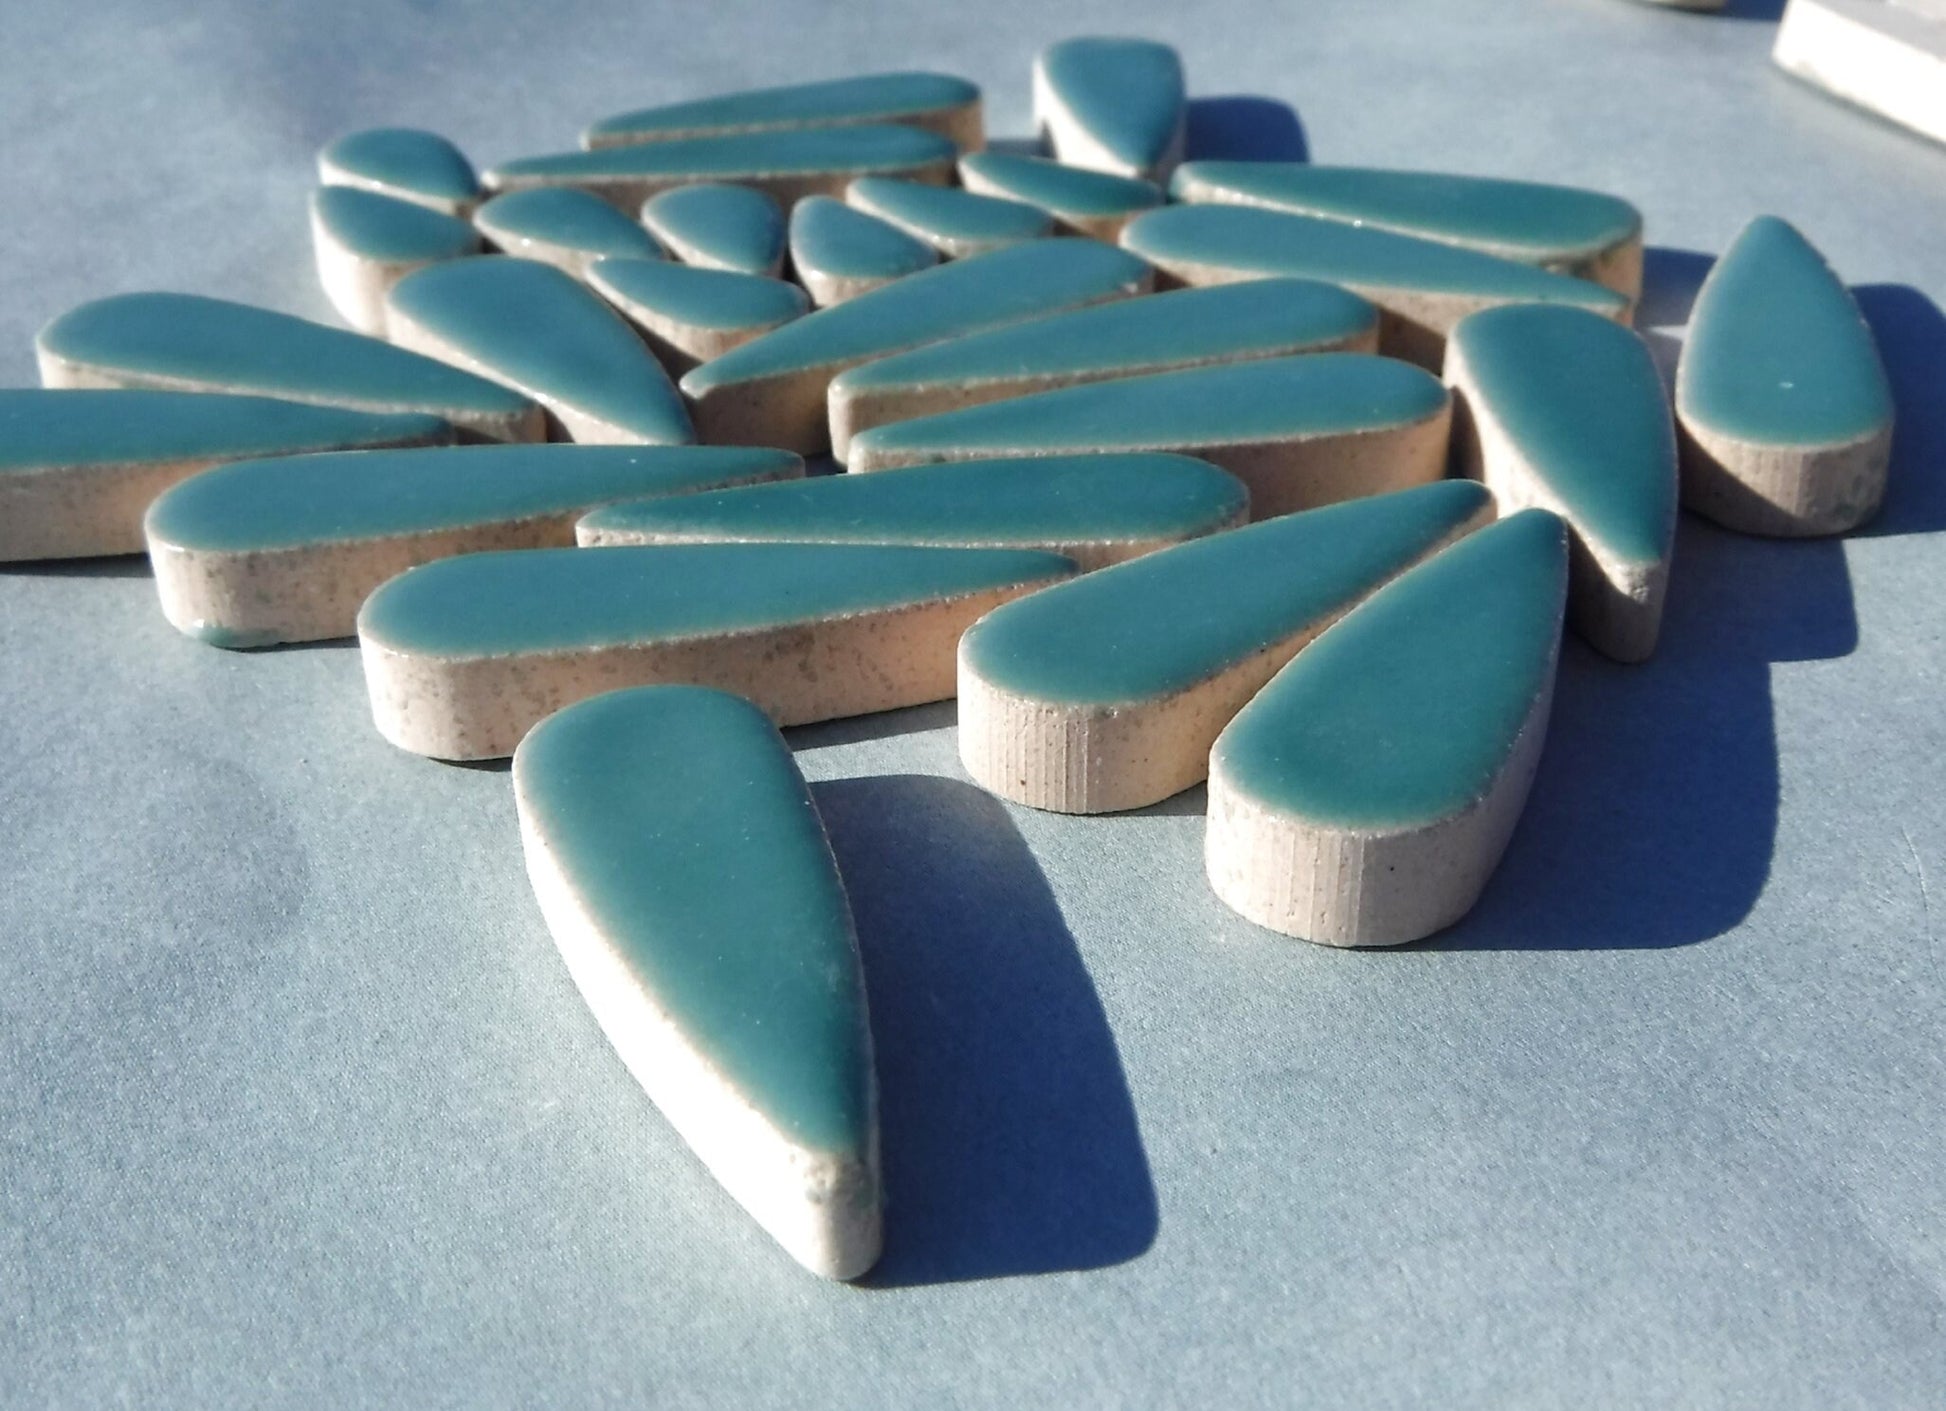 Sea Green Teardrop Mosaic Tiles - 50g Ceramic Petals in Mix of 2 Sizes 1/2" and 3/5"